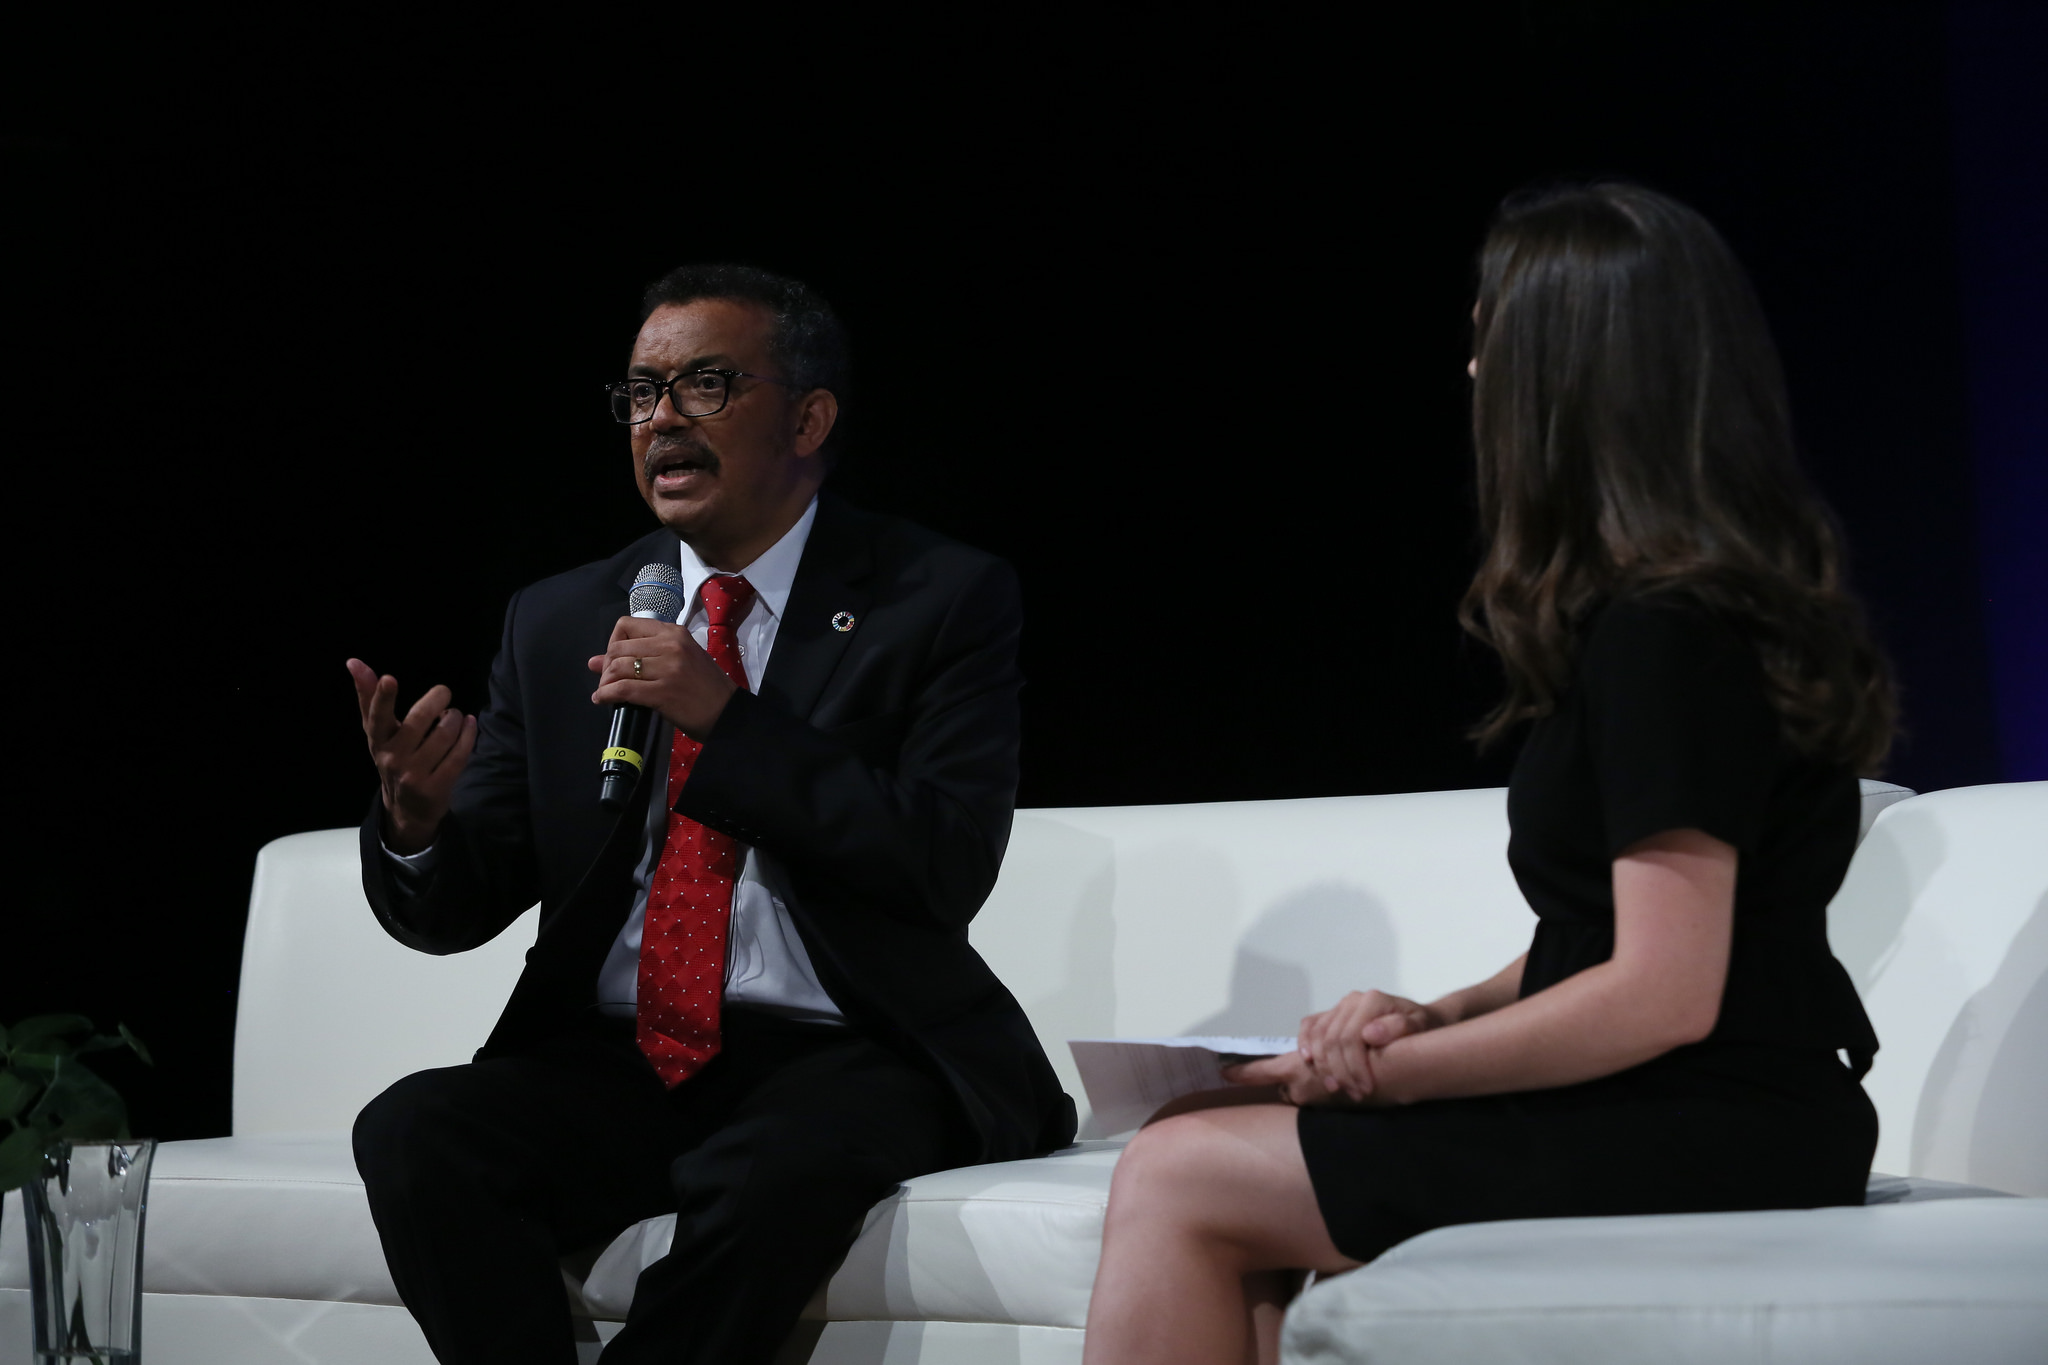 Dr. Tedros Adhanom Ghebreyesus, the director general of the World Health Organization (WHO), discusses universal health coverage at the Social Good Summit in New York City on Sept. 17. (Stuart Ramson/UN Foundation)